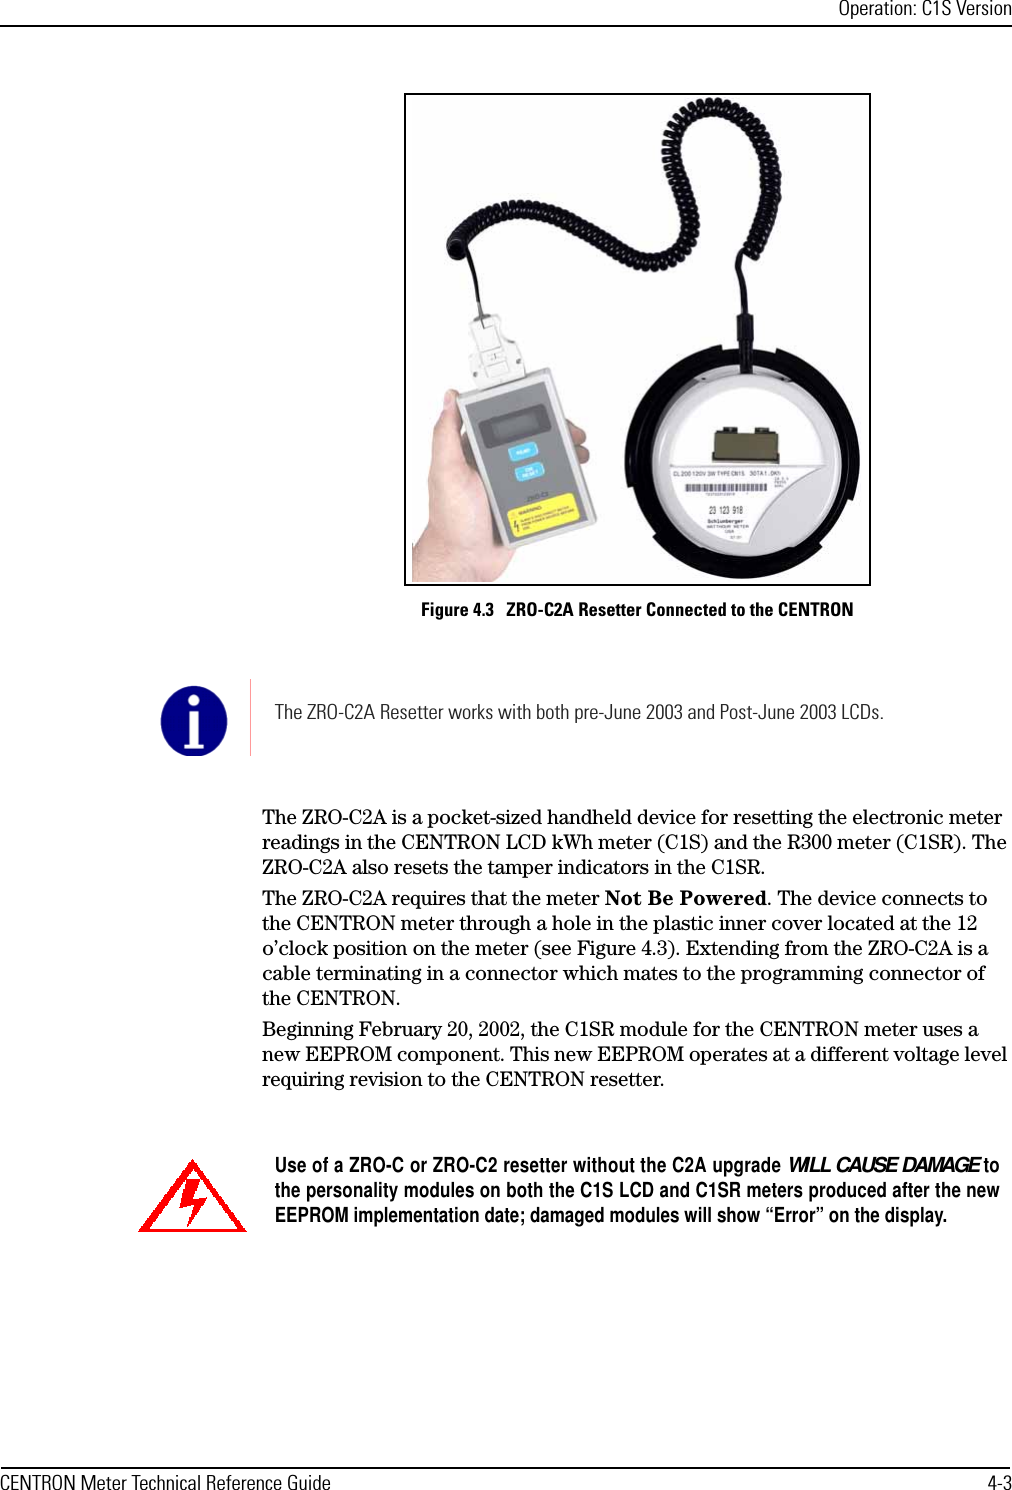 Operation: C1S VersionCENTRON Meter Technical Reference Guide 4-3Figure 4.3   ZRO-C2A Resetter Connected to the CENTRONThe ZRO-C2A is a pocket-sized handheld device for resetting the electronic meter readings in the CENTRON LCD kWh meter (C1S) and the R300 meter (C1SR). The ZRO-C2A also resets the tamper indicators in the C1SR.The ZRO-C2A requires that the meter Not Be Powered. The device connects to the CENTRON meter through a hole in the plastic inner cover located at the 12 o’clock position on the meter (see Figure 4.3). Extending from the ZRO-C2A is a cable terminating in a connector which mates to the programming connector of the CENTRON.Beginning February 20, 2002, the C1SR module for the CENTRON meter uses a new EEPROM component. This new EEPROM operates at a different voltage level requiring revision to the CENTRON resetter.The ZRO-C2A Resetter works with both pre-June 2003 and Post-June 2003 LCDs.Use of a ZRO-C or ZRO-C2 resetter without the C2A upgrade WILL CAUSE DAMAGE tothe personality modules on both the C1S LCD and C1SR meters produced after the newEEPROM implementation date; damaged modules will show “Error” on the display.